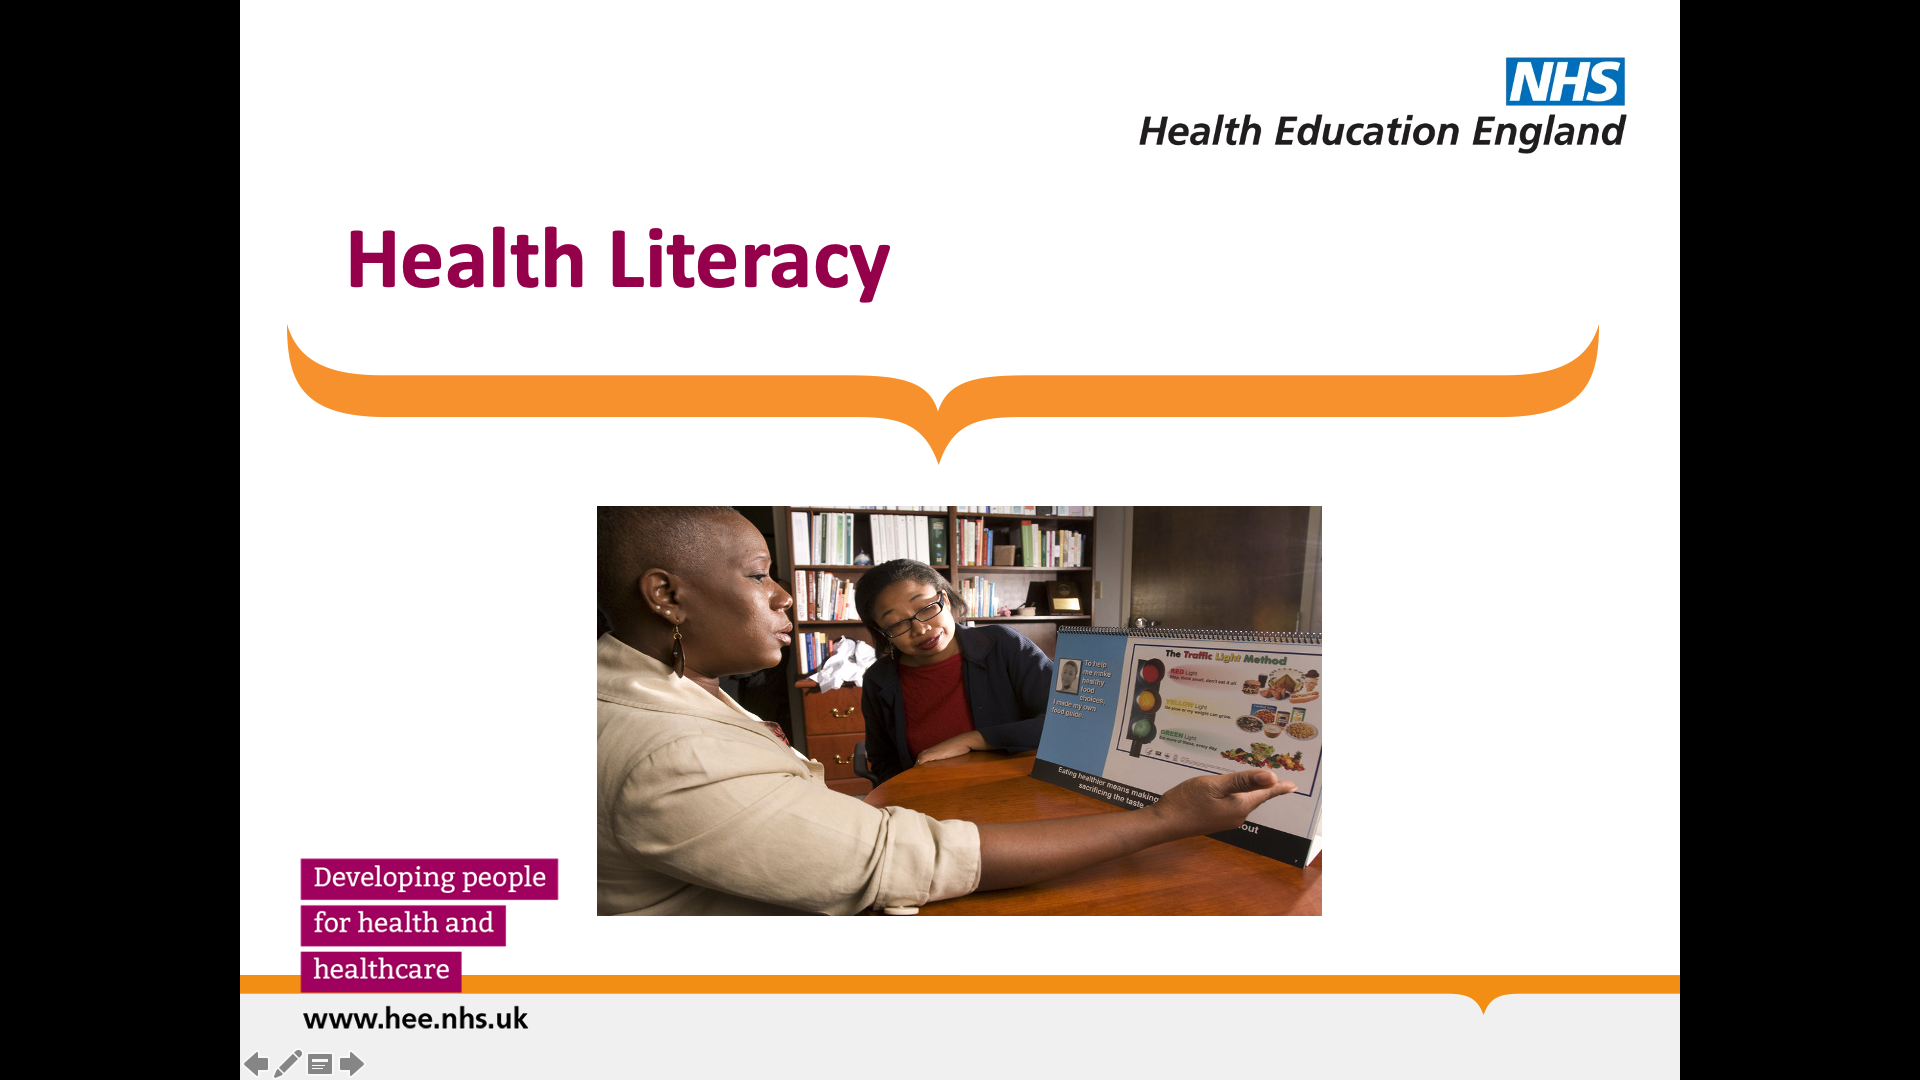 Title: Health Literacy. Image of two library professionals discussing